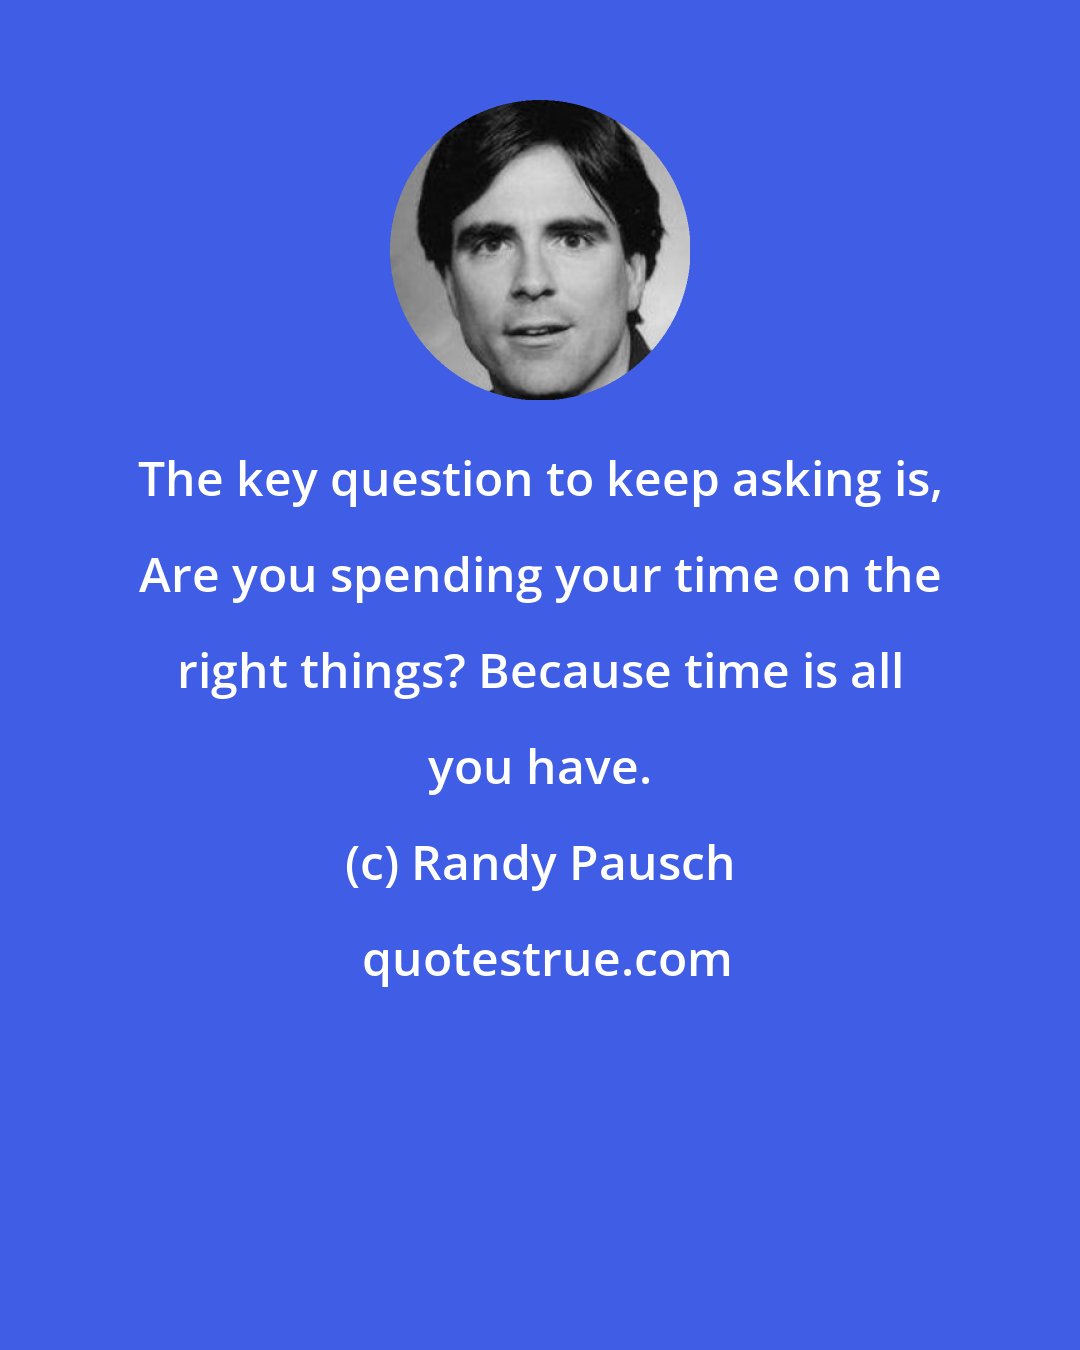 Randy Pausch: The key question to keep asking is, Are you spending your time on the right things? Because time is all you have.